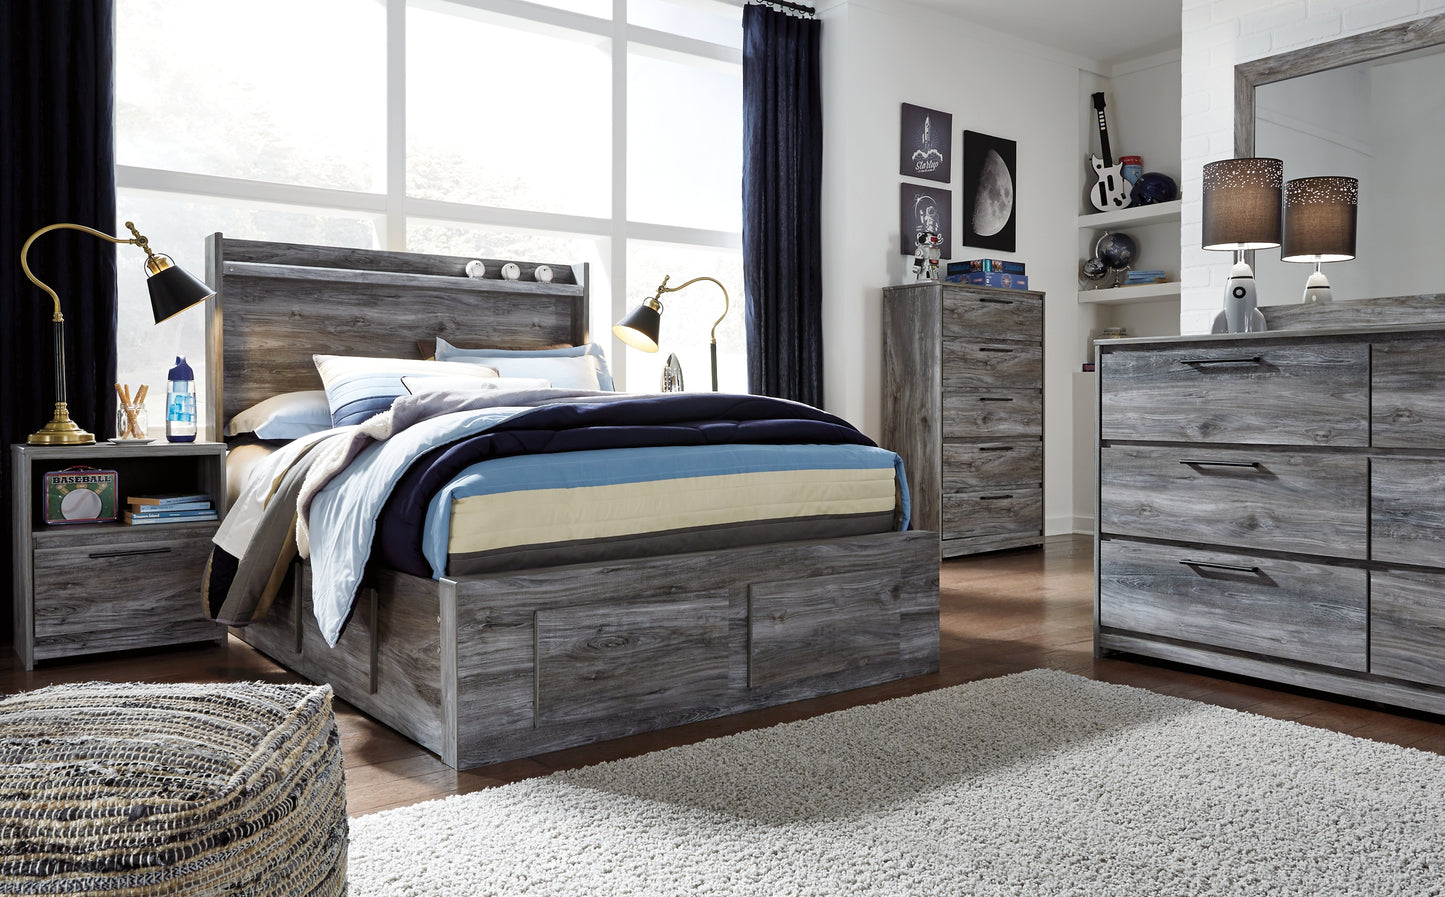 Baystorm Panel Bed With 6 Storage Drawers JB's Furniture Furniture, Bedroom, Accessories